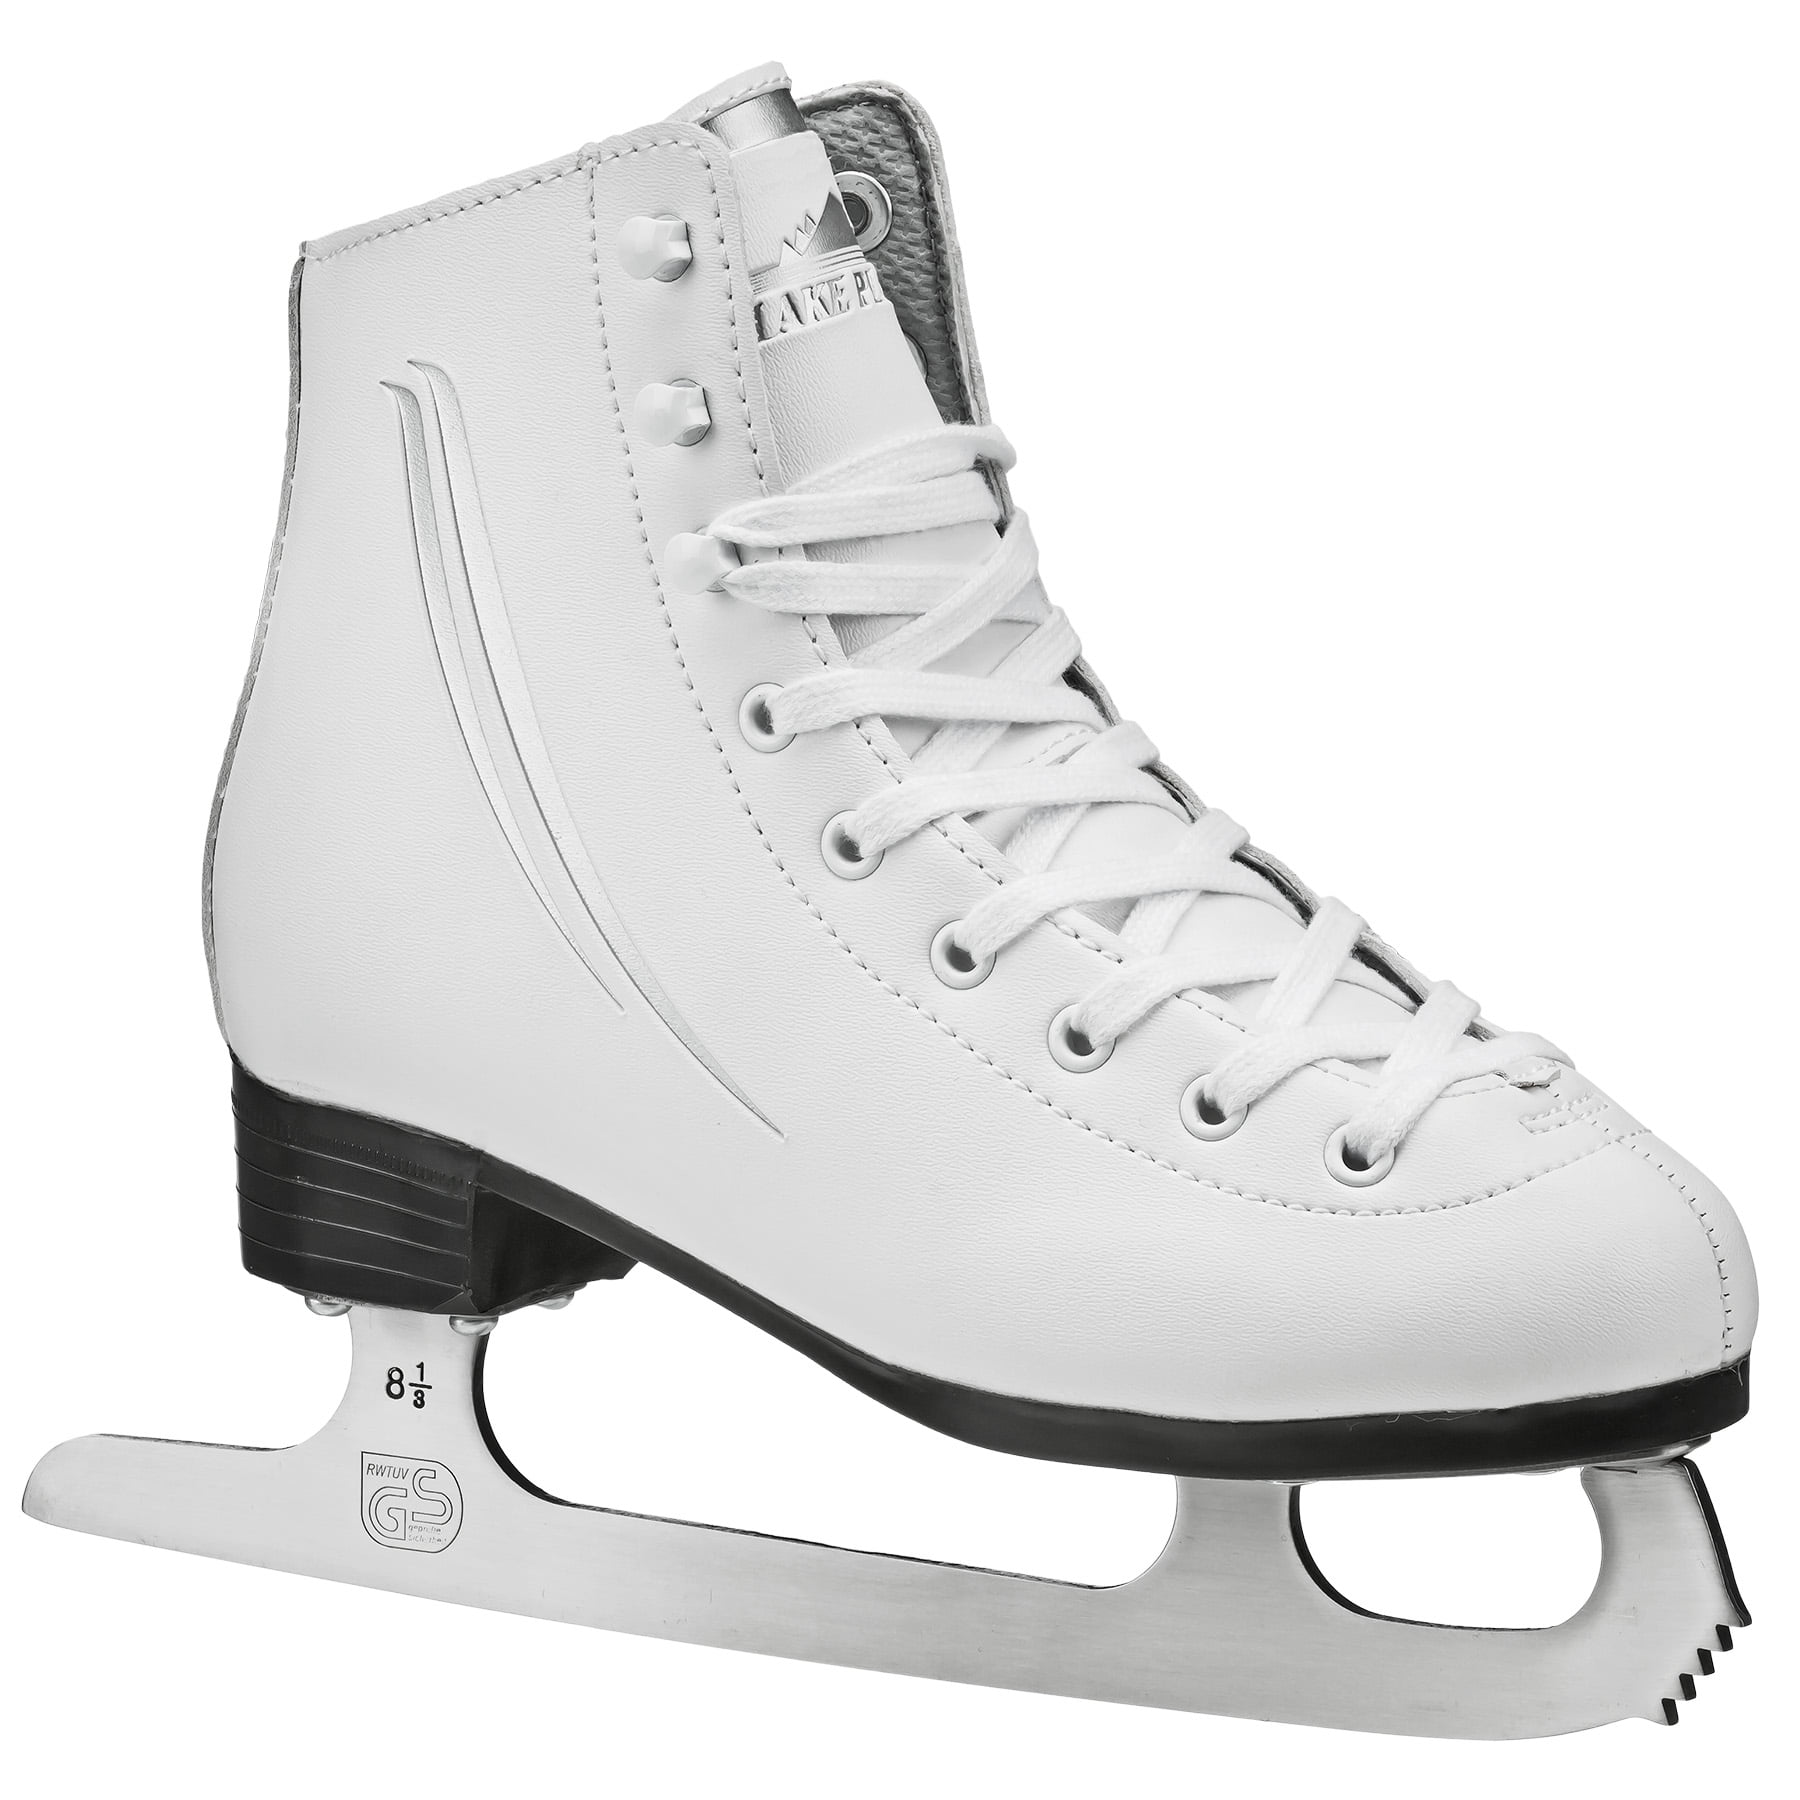 55210-P American Athletic Shoe Mens Tricot Lined Figure Skates American Athletic Shoe Co